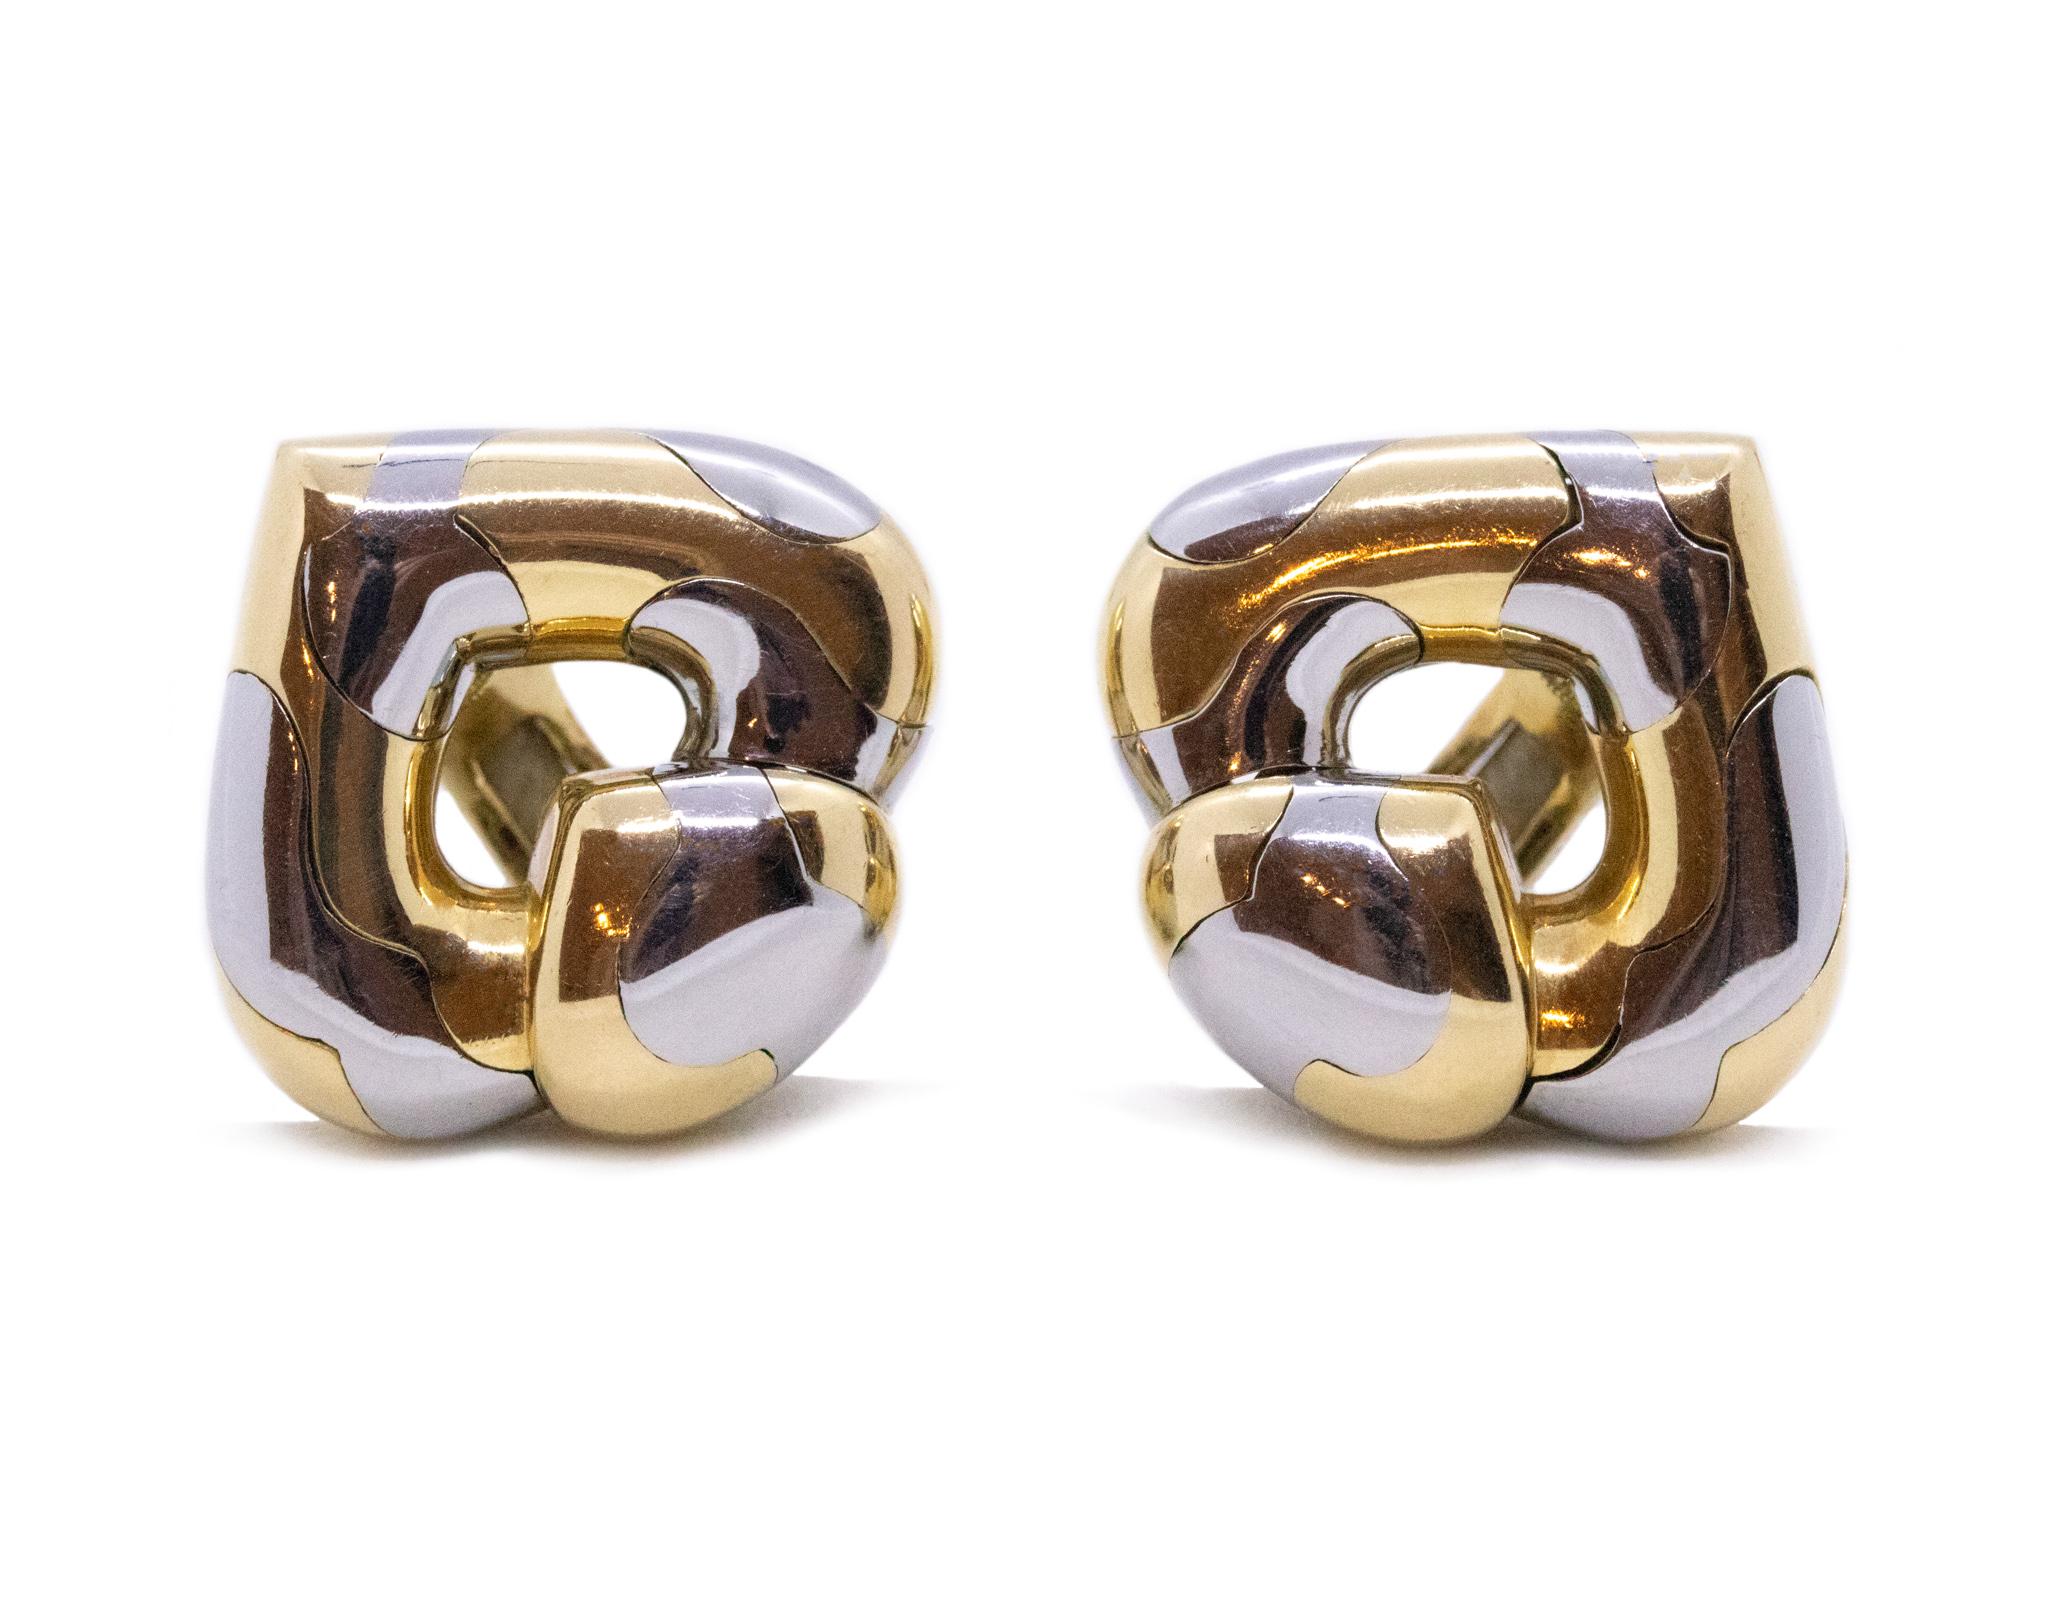 Pair of ear clips earrings designed by Marina B. (Bvlgari). 

This pair is part of the 